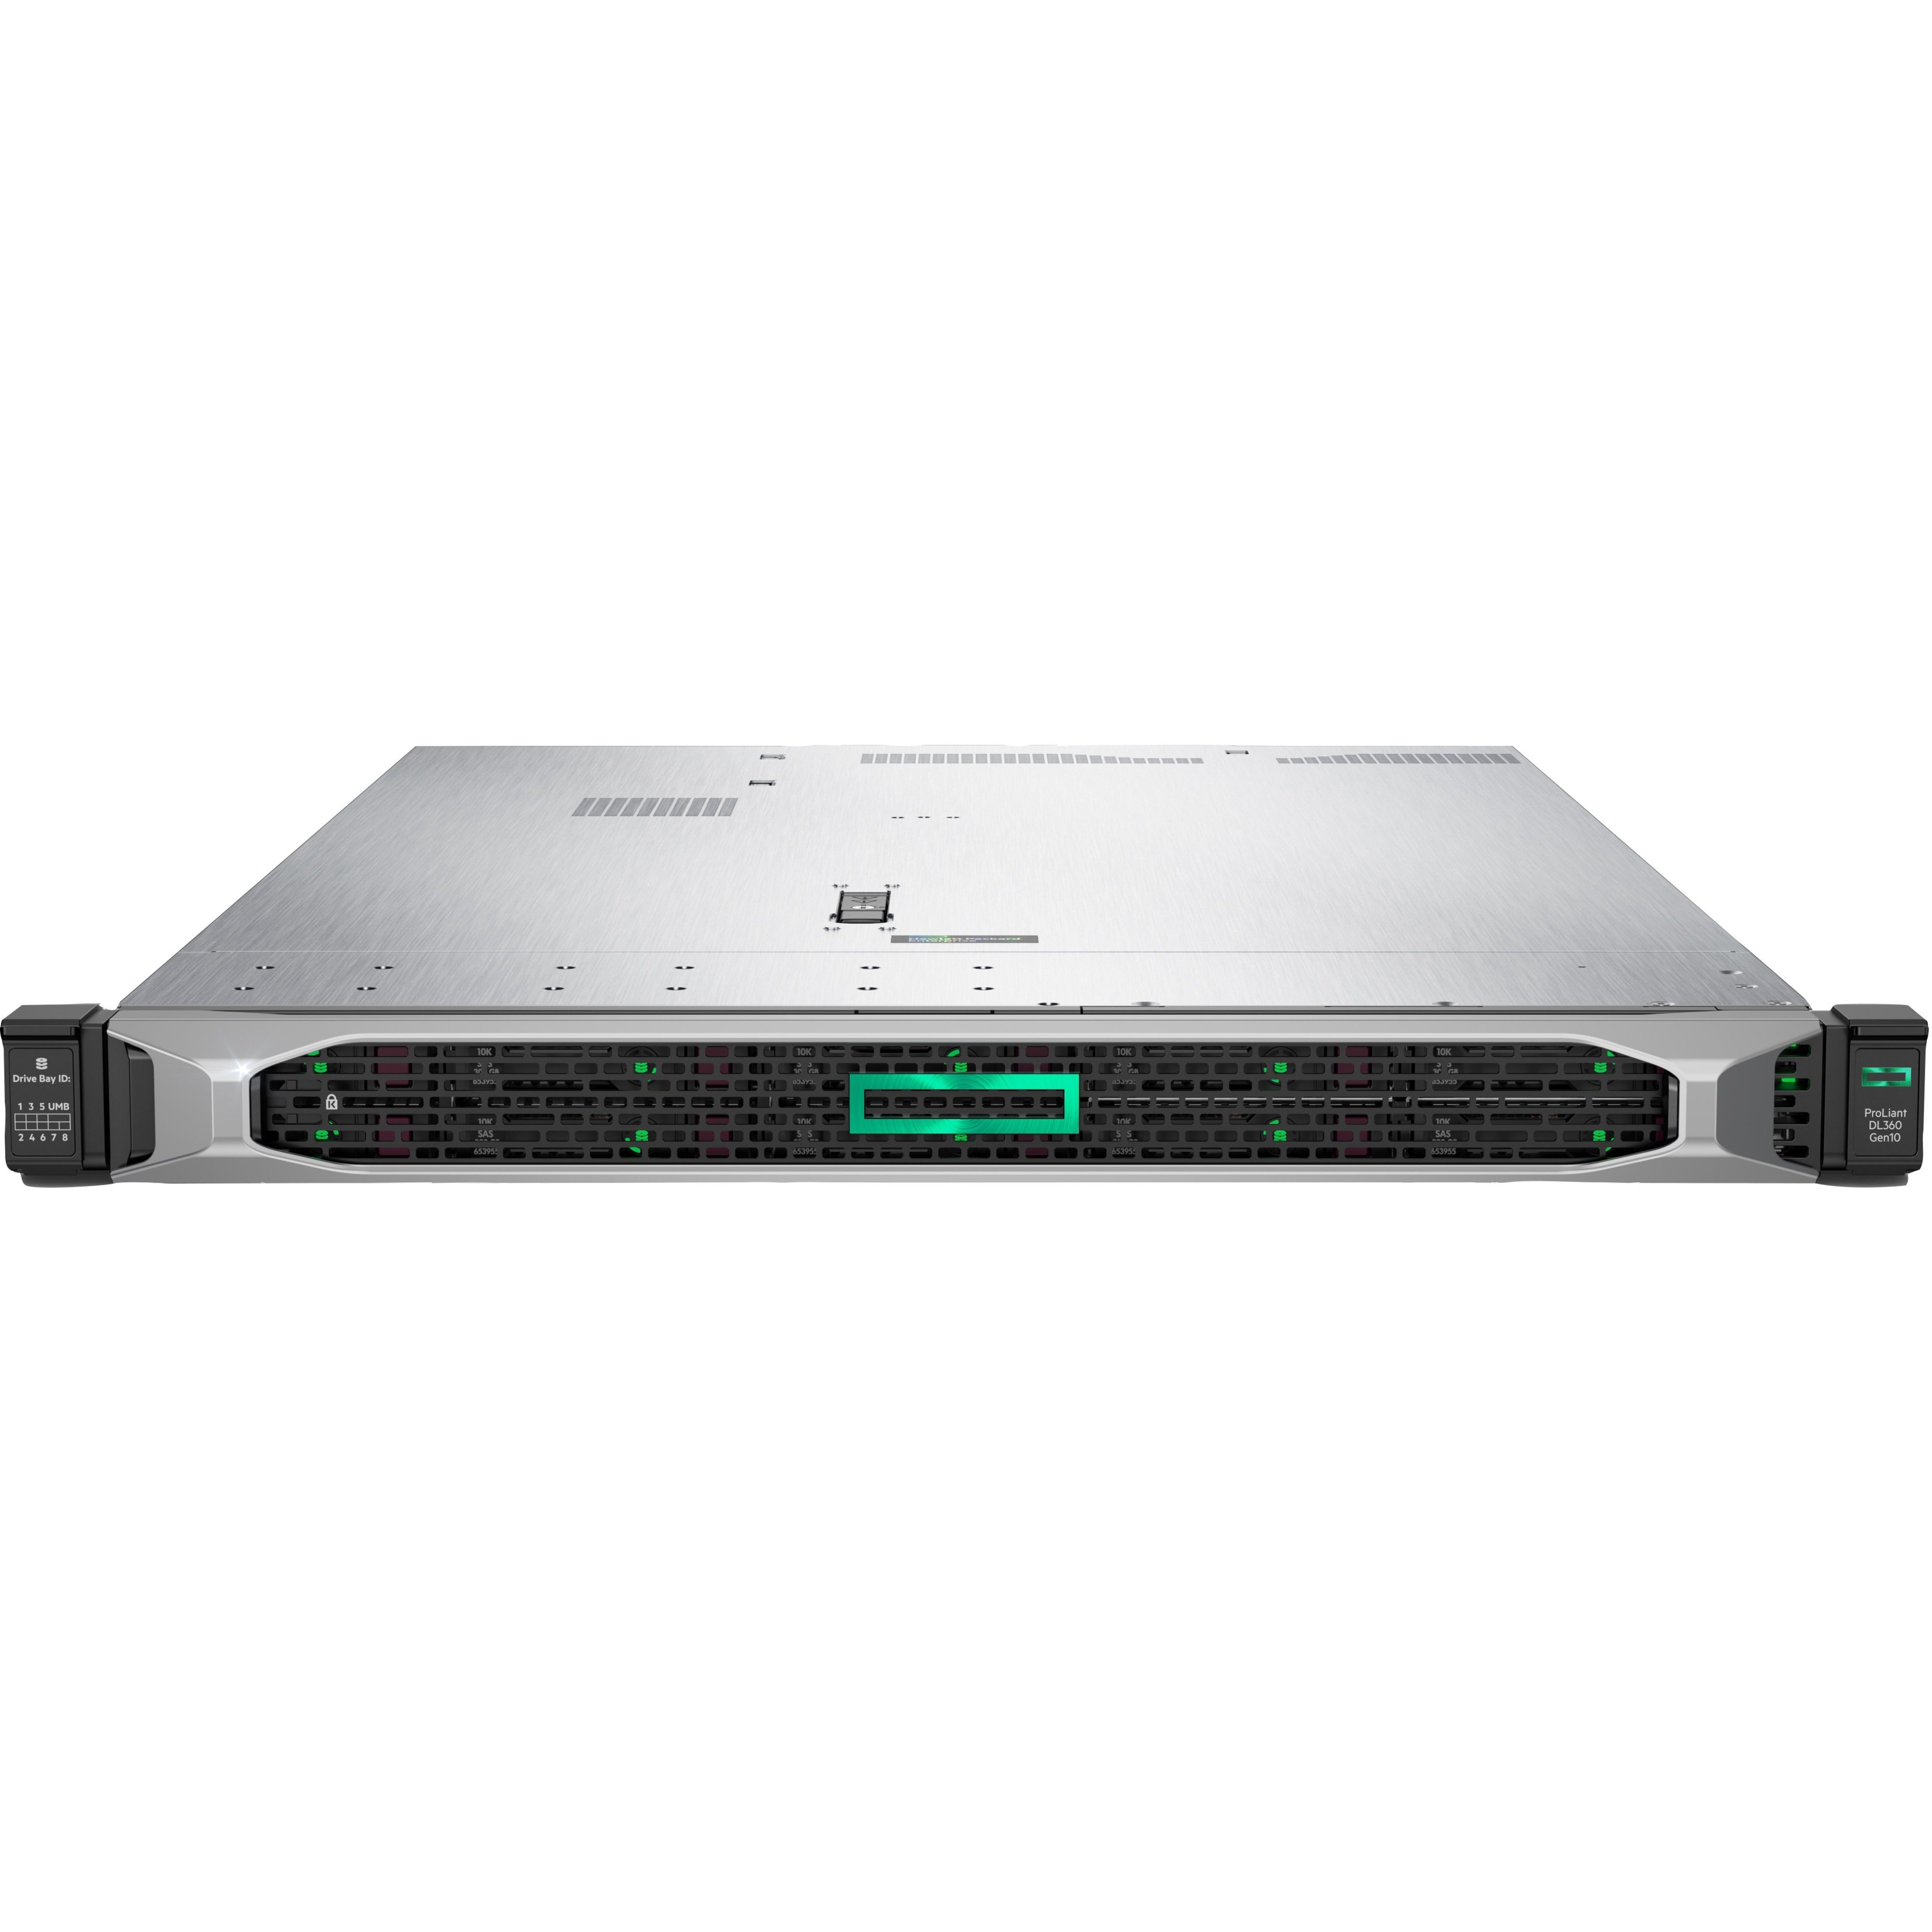 HPE P19774-B21 ProLiant DL360 Gen10 4208 2.1GHz 8-core 1P 16GB-R P408i-a NC 8SFF 500W PS Server [Discontinued]